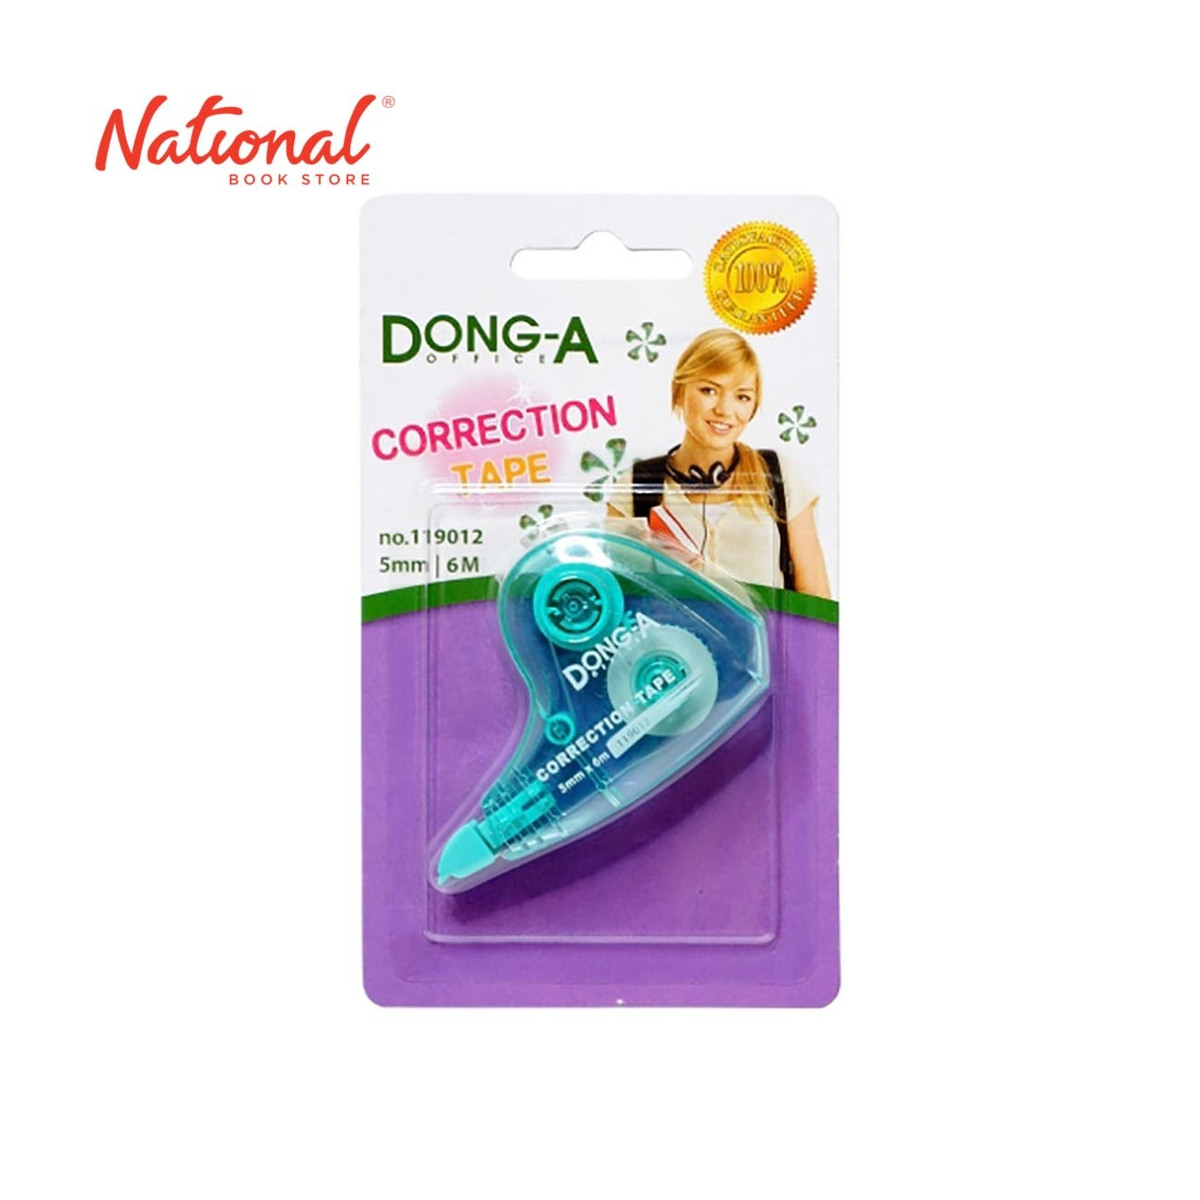 DONG-A CORRECTION TAPE 119012 5MMX6M